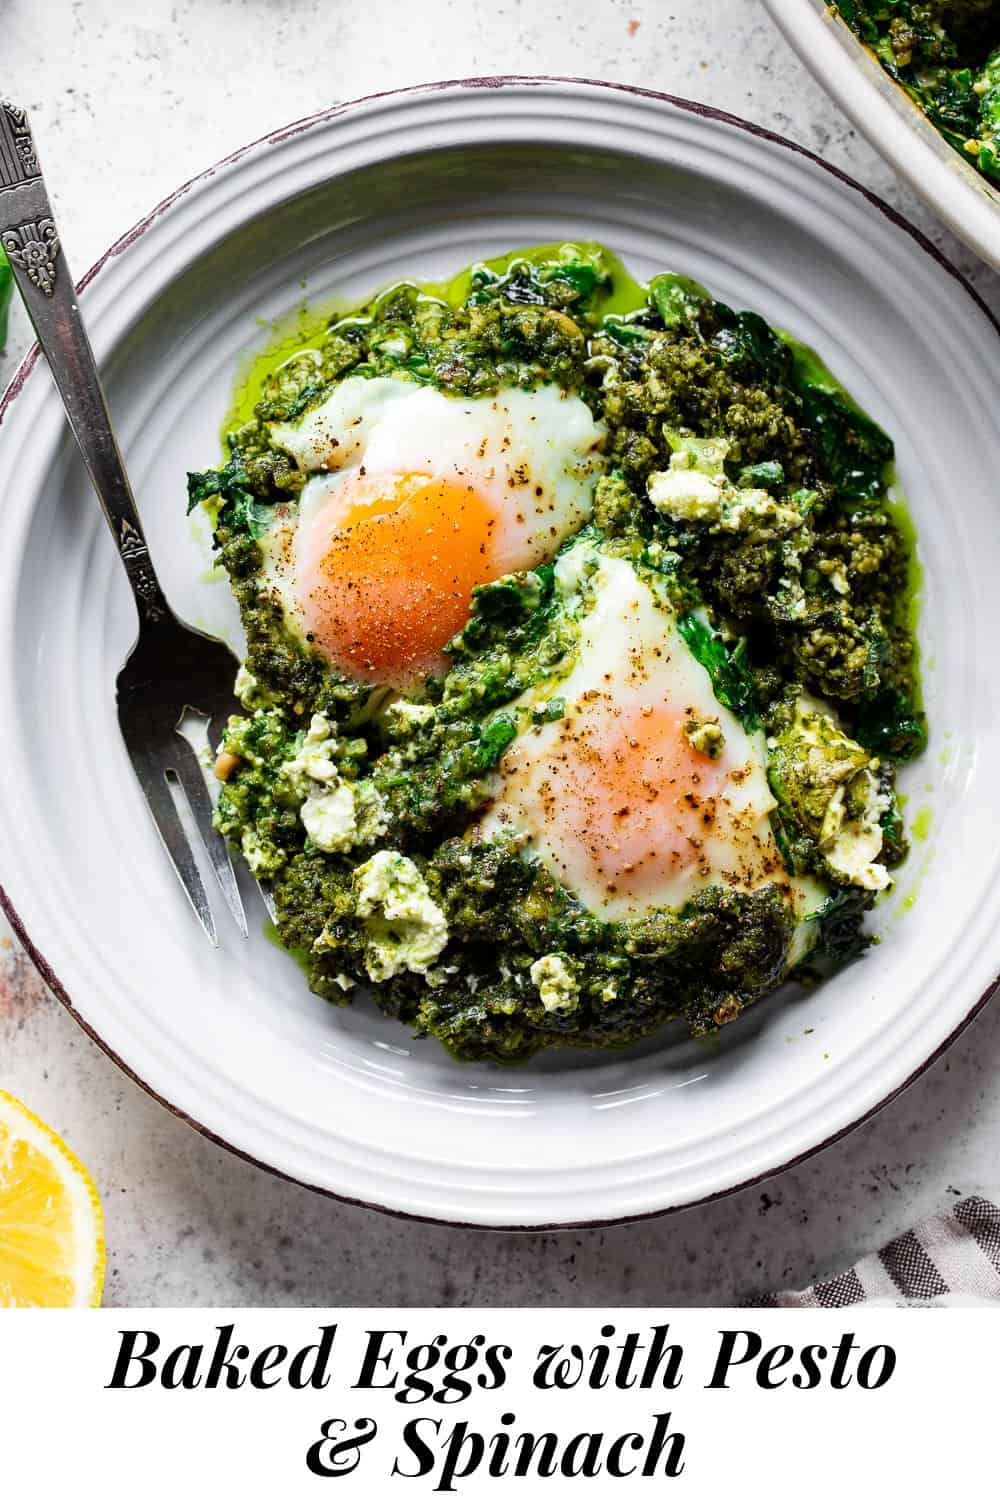 https://www.paleorunningmomma.com/wp-content/uploads/2022/04/baked-eggs-with-pesto-and-spinach-2-1.jpg